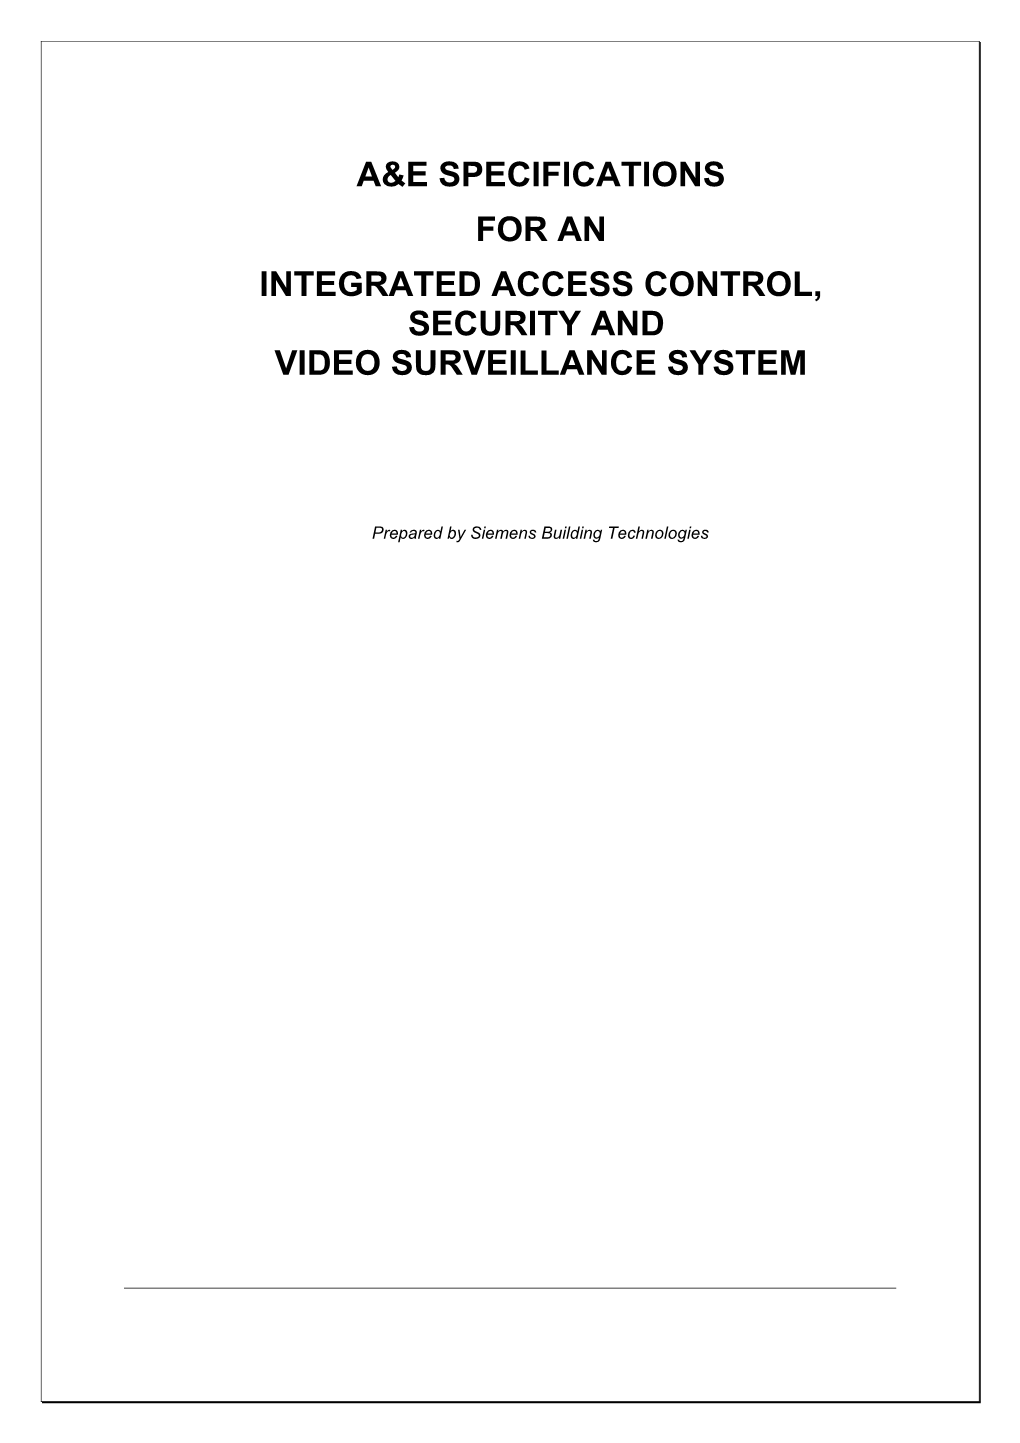 Integrated Access Control, Securityand Video Surveillance System